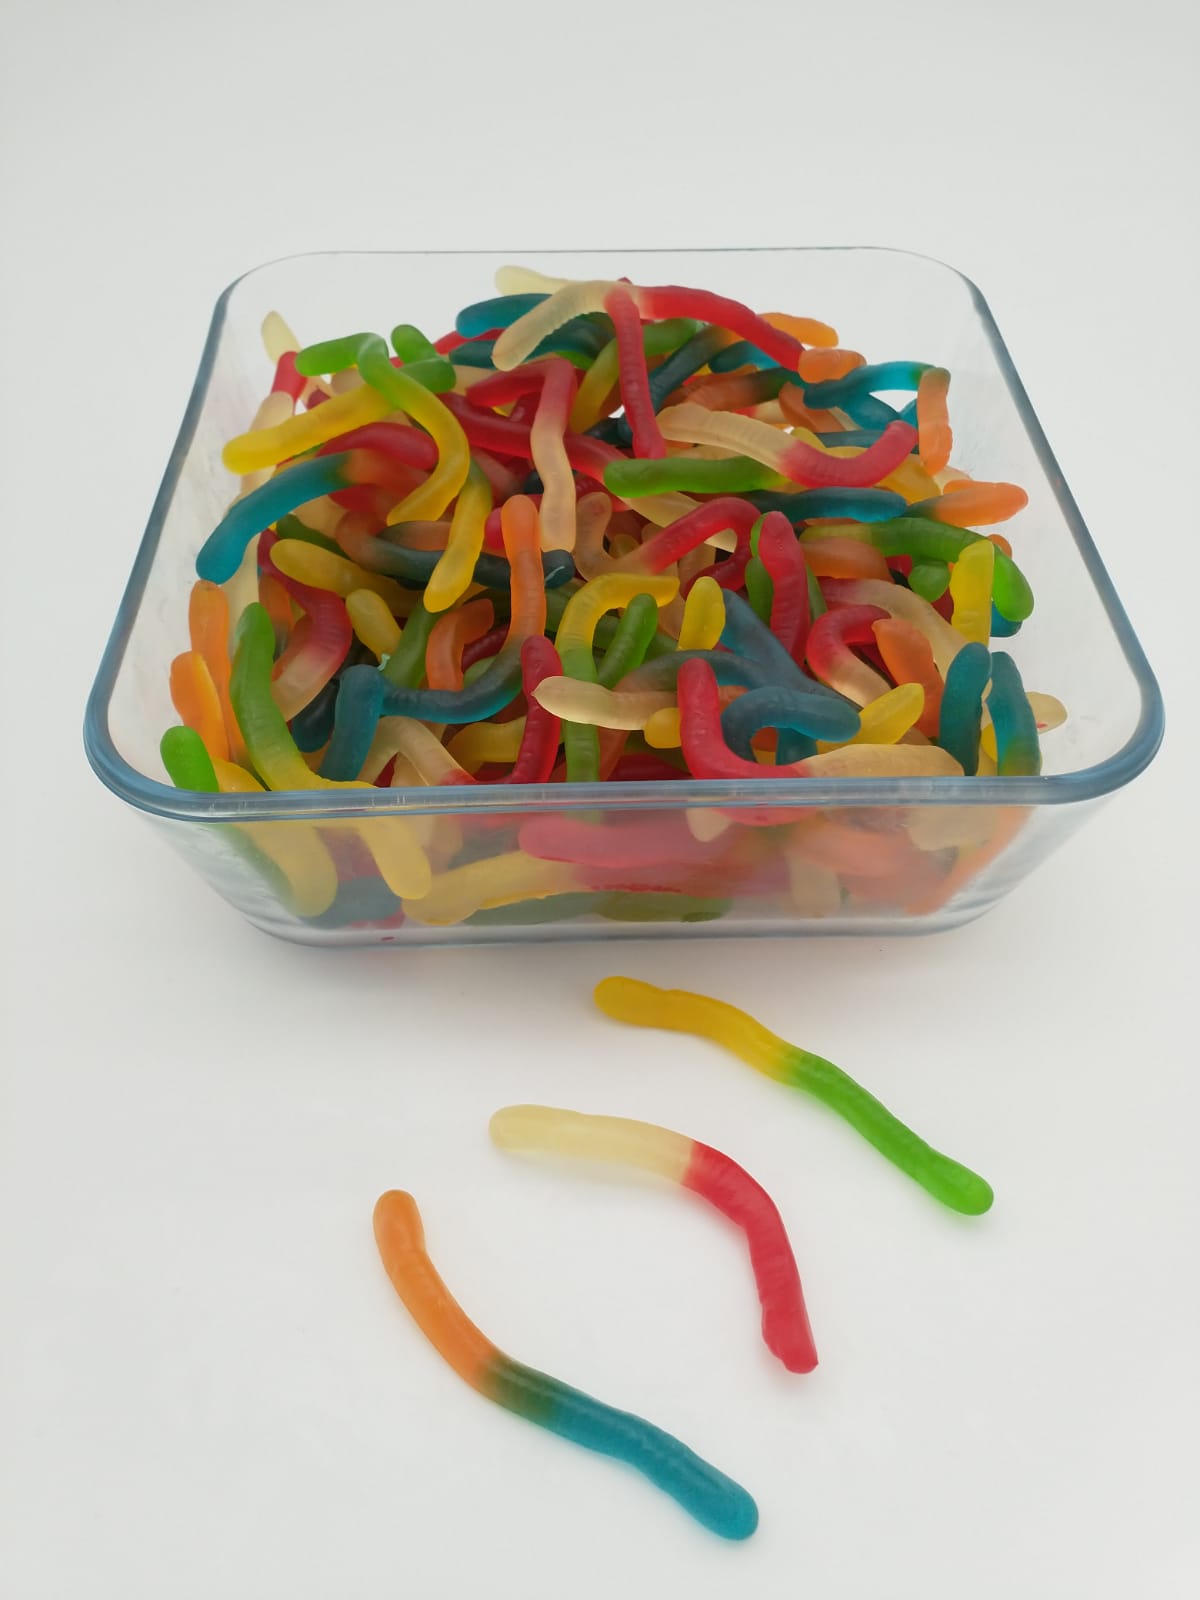 Plain Jelly Worms